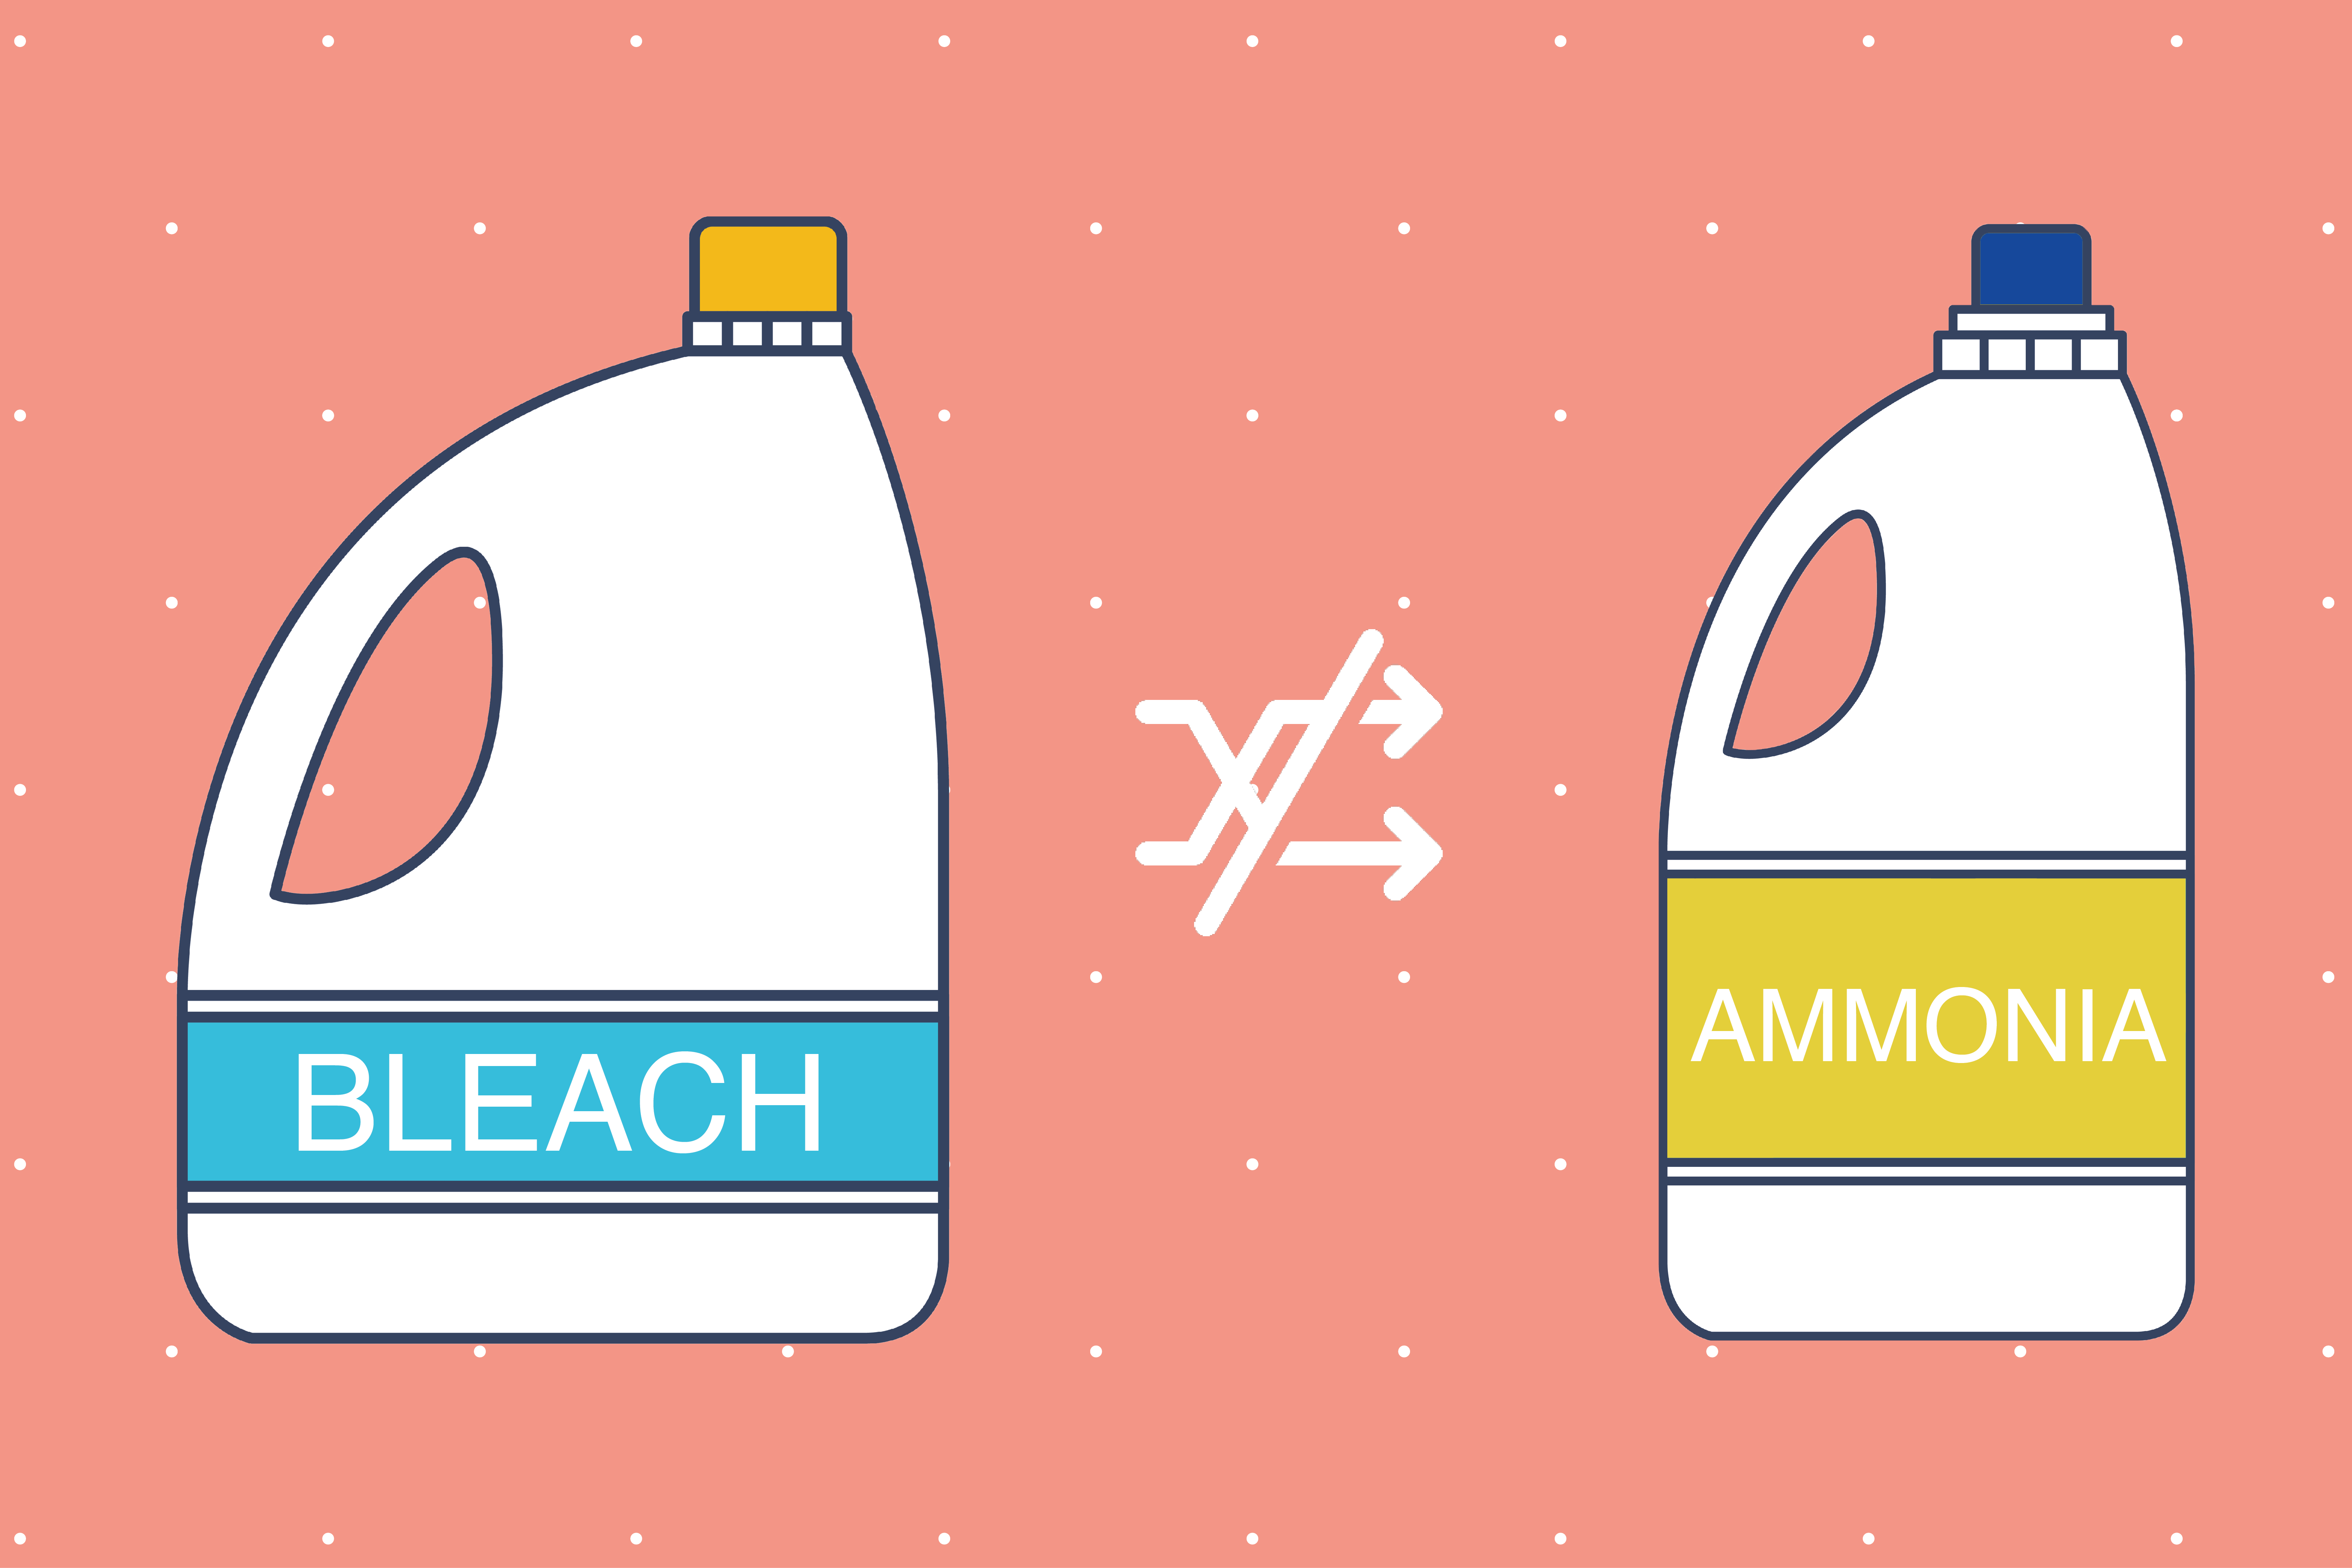 3 Cleaning Products That You Should Not Mix With Vinegar